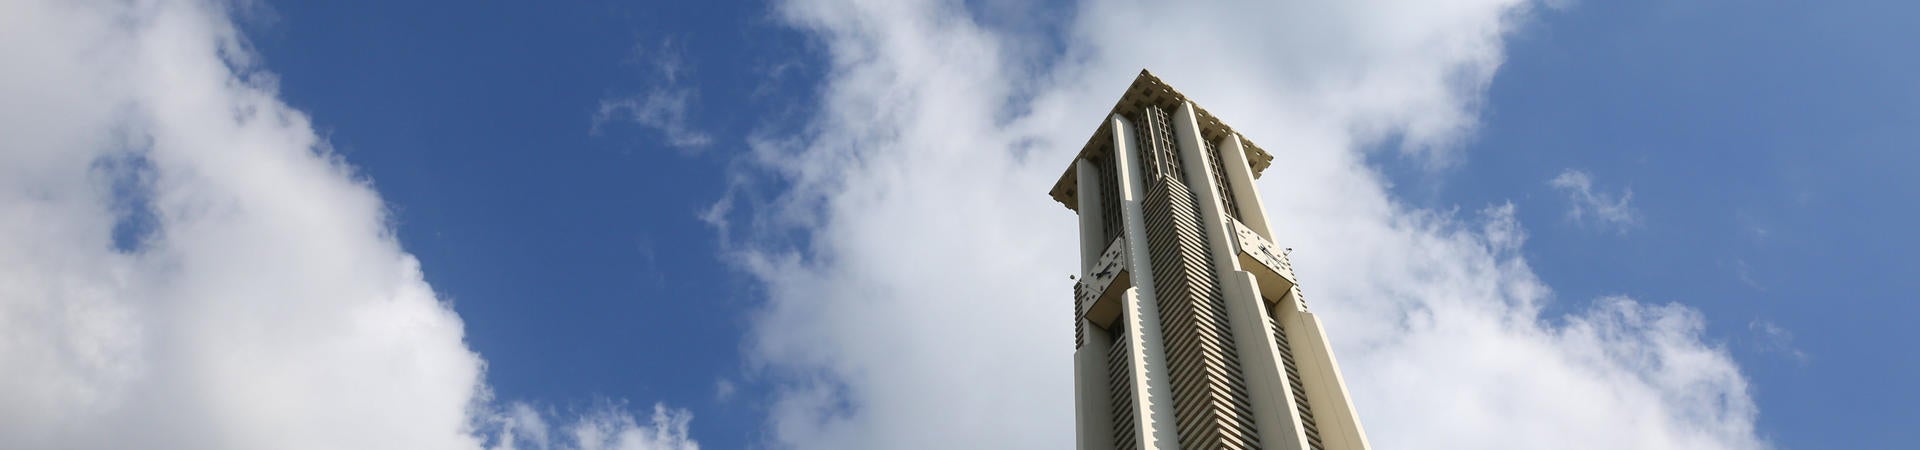 Looking up at the UCR Bell Tower against a blue sky with white clouds